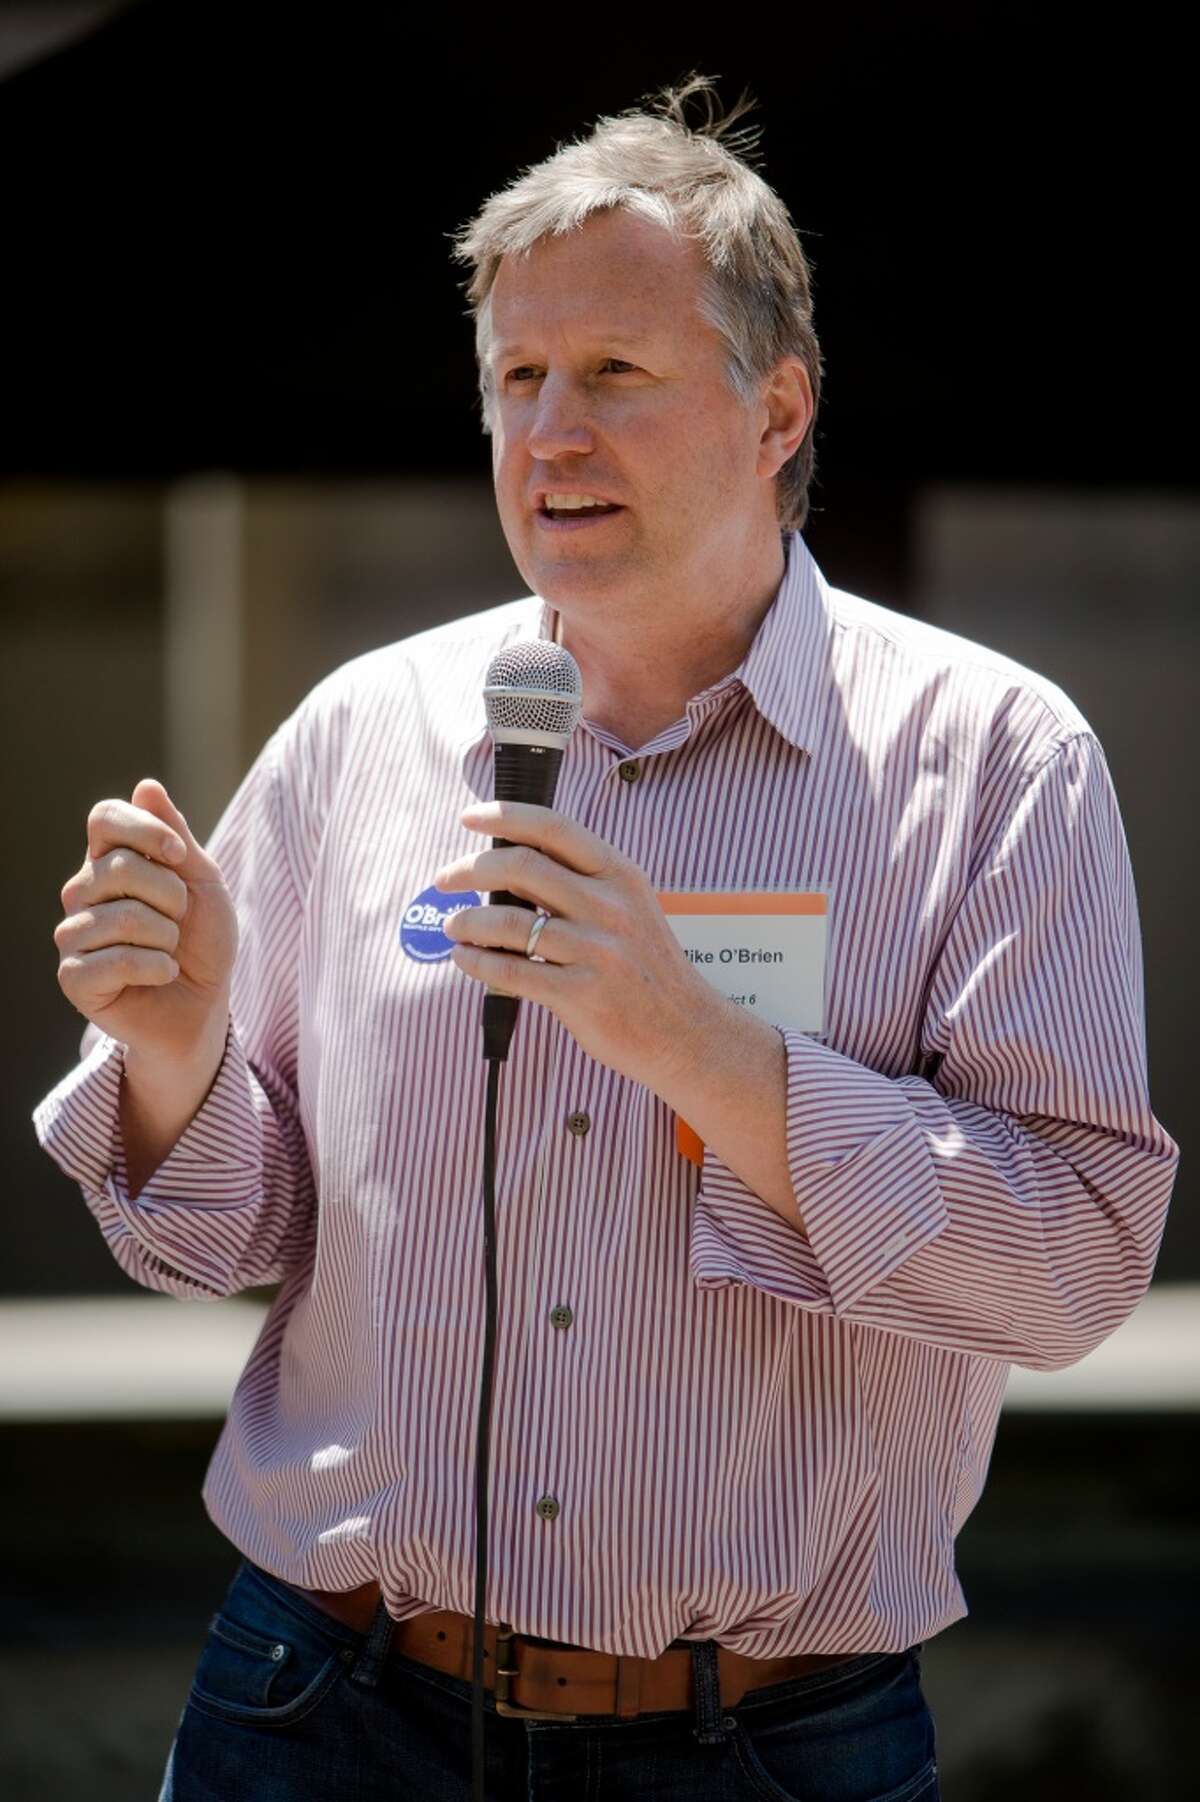 Seattle Councilmember Mike O'Brien gets 'thrown out of event' for